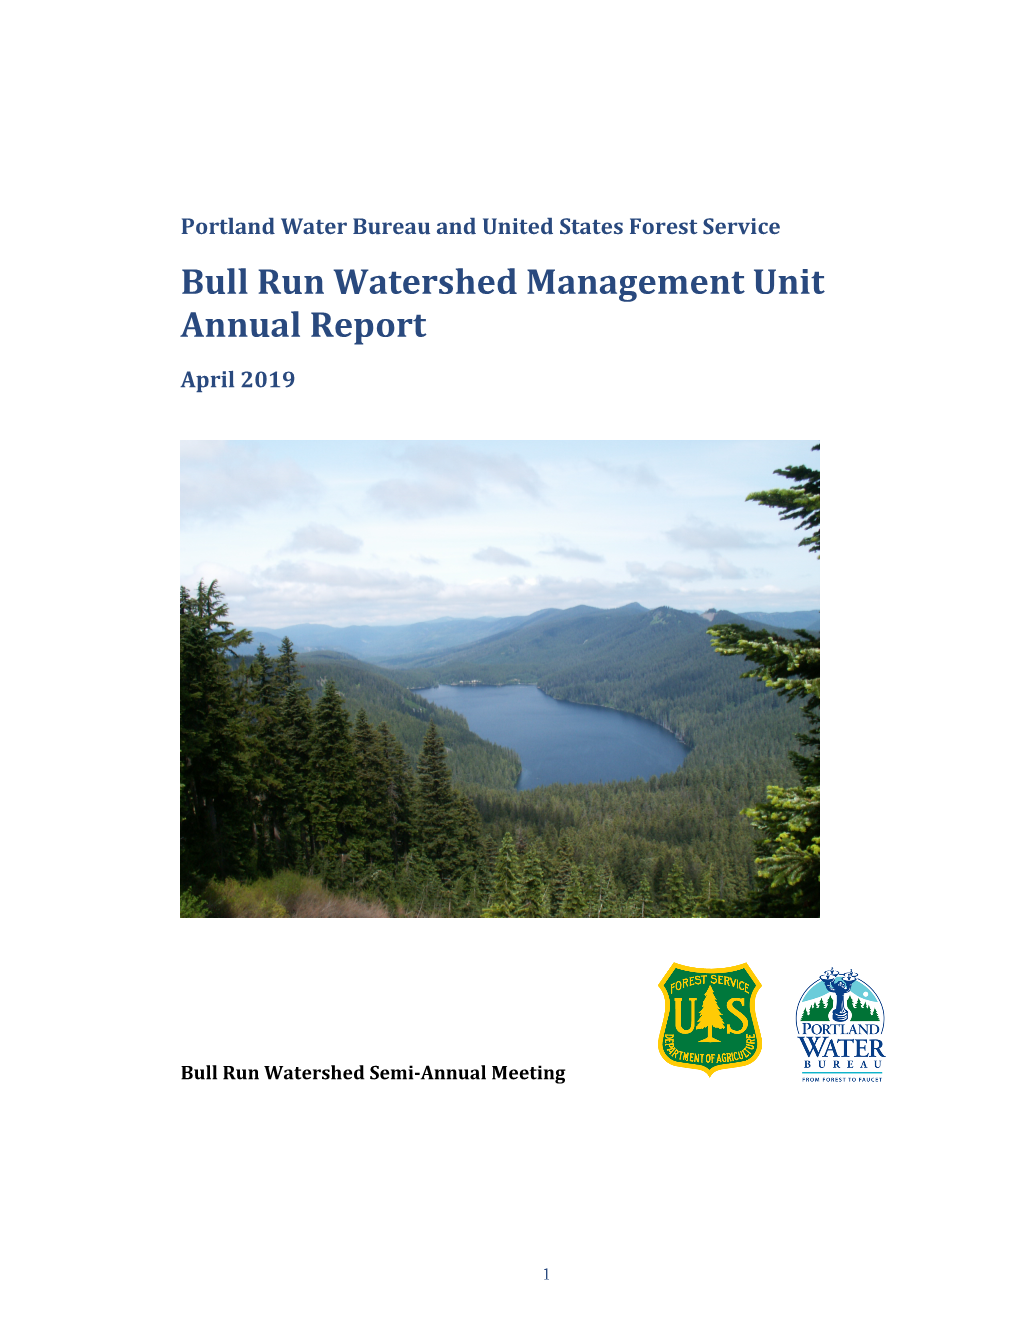 Portland Water Bureau and United States Forest Service Bull Run Watershed Management Unit Annual Report April 2019